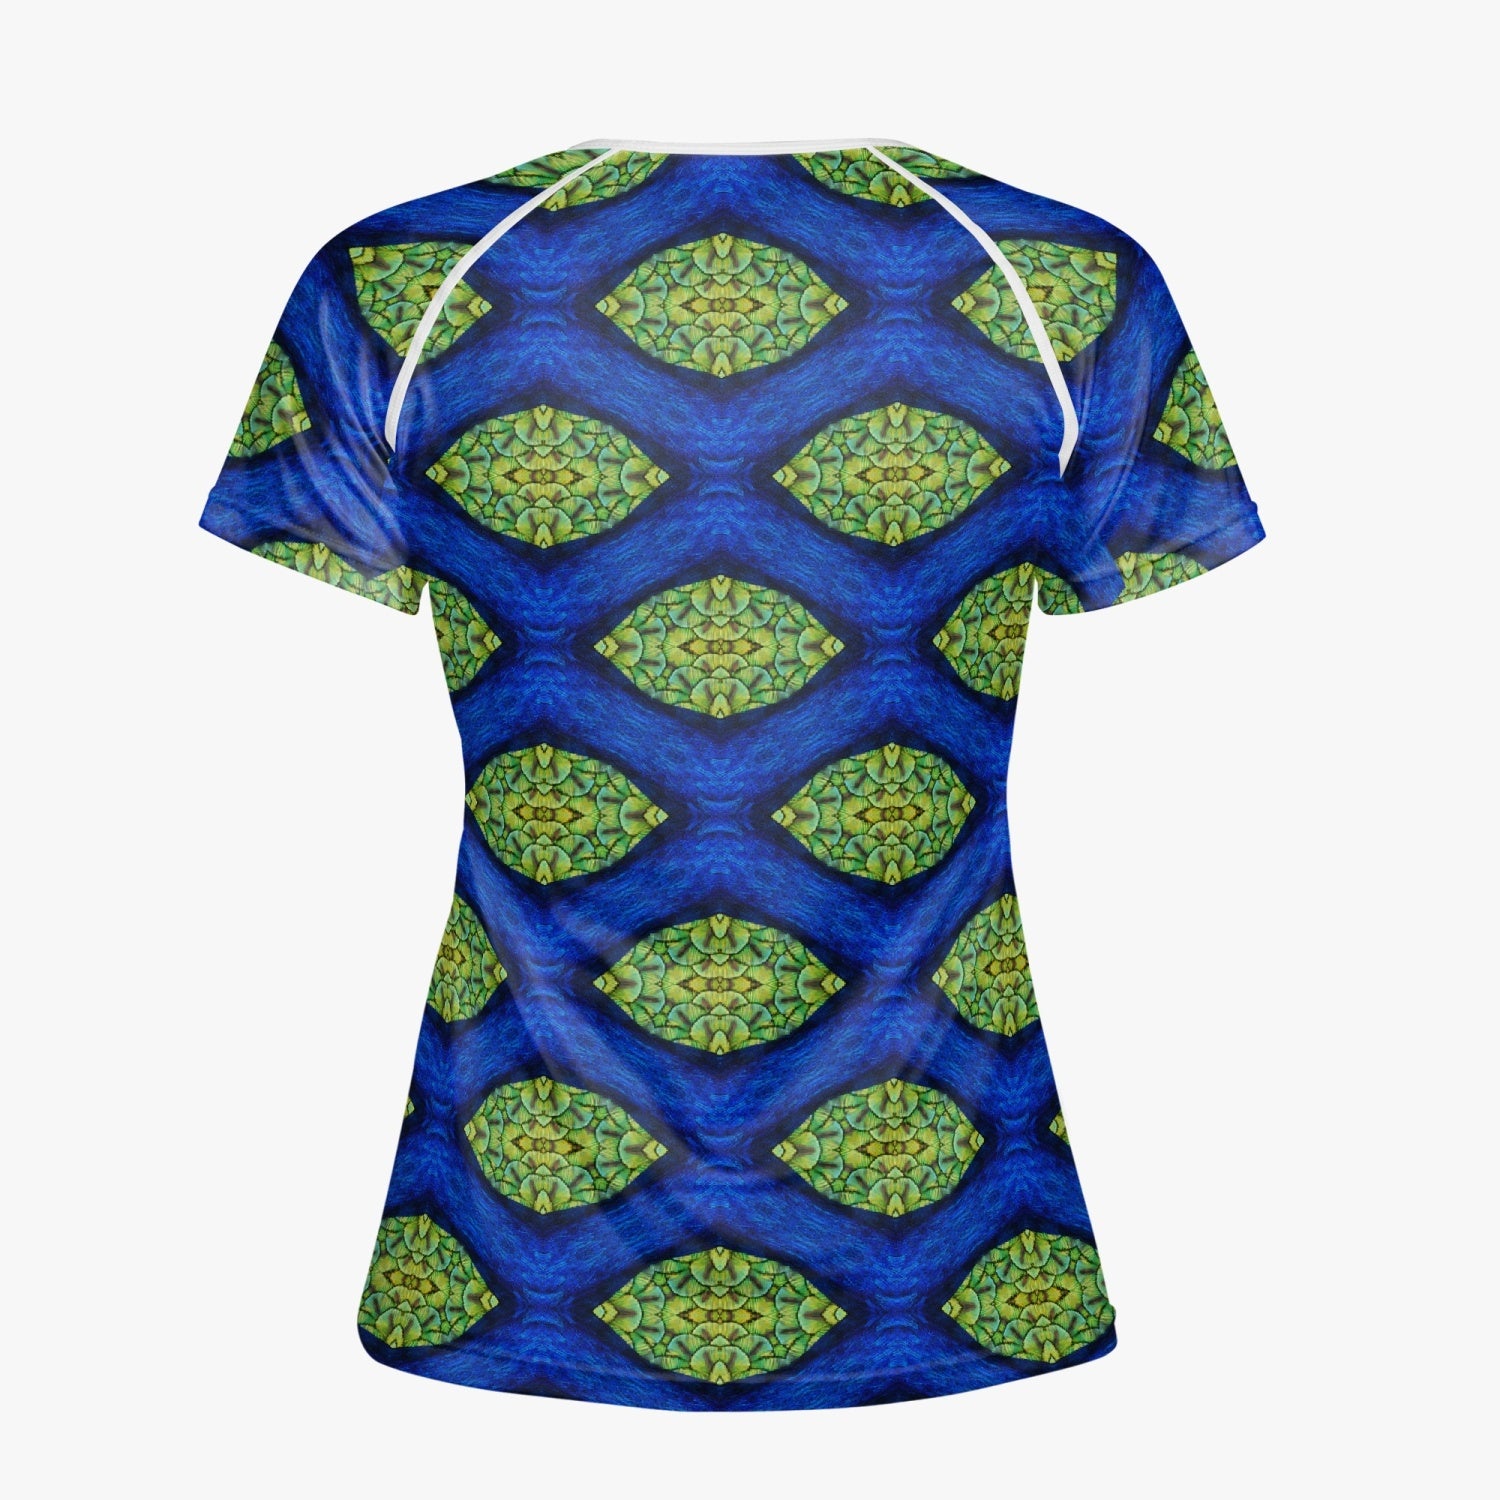 The Heart and Brain connection Handmade Yoga Top for Women T-shirt, by Sensus Studio Design